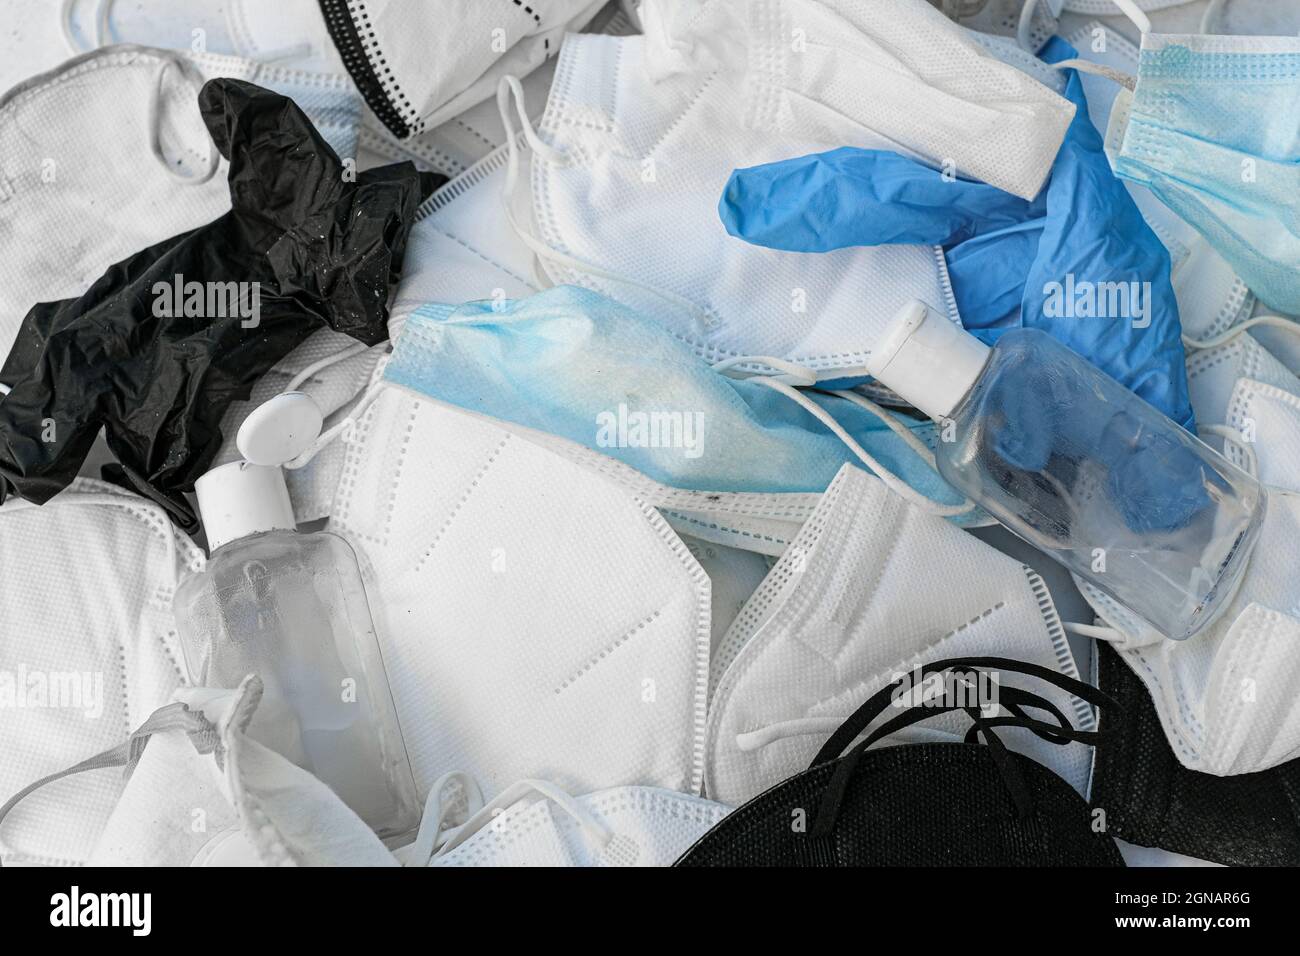 Pile of discarded used protective face mask,hand sanitizer bottle and gloves,covid19 pandemic waste pollution Stock Photo